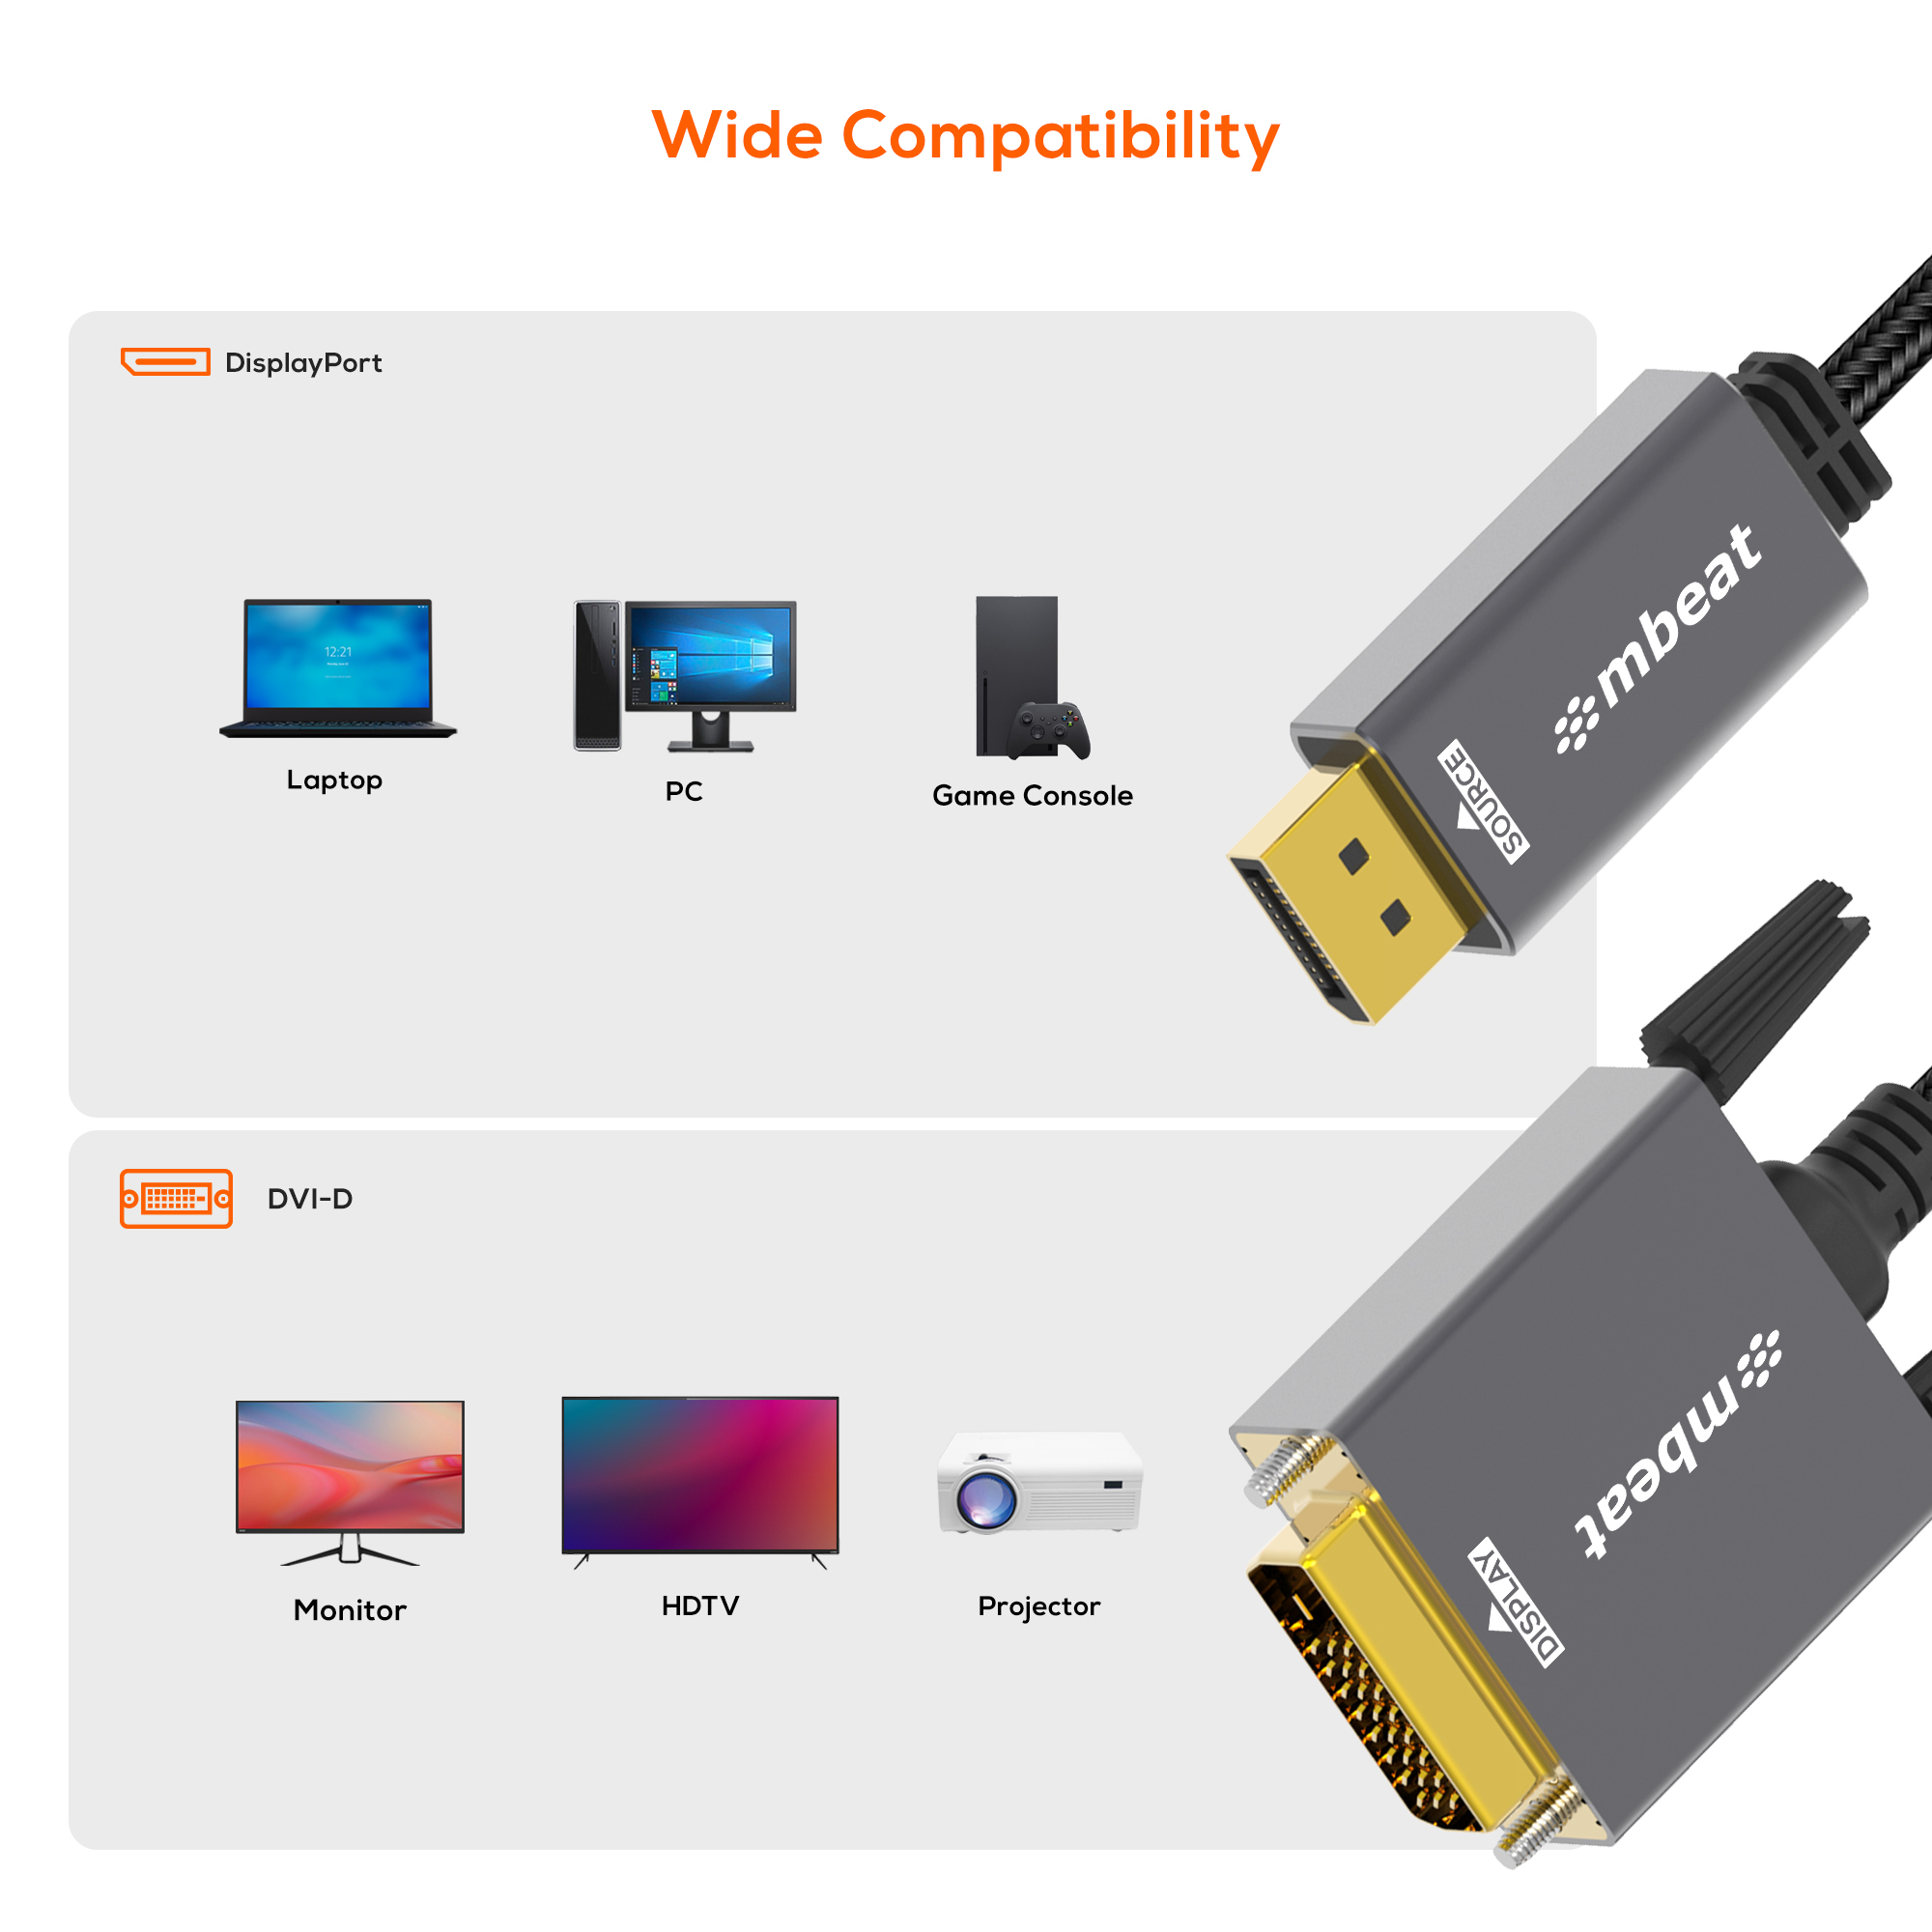 A large marketing image providing additional information about the product mbeat Tough Link DisplayPort to DVI-D Cable - 1.8m - Additional alt info not provided